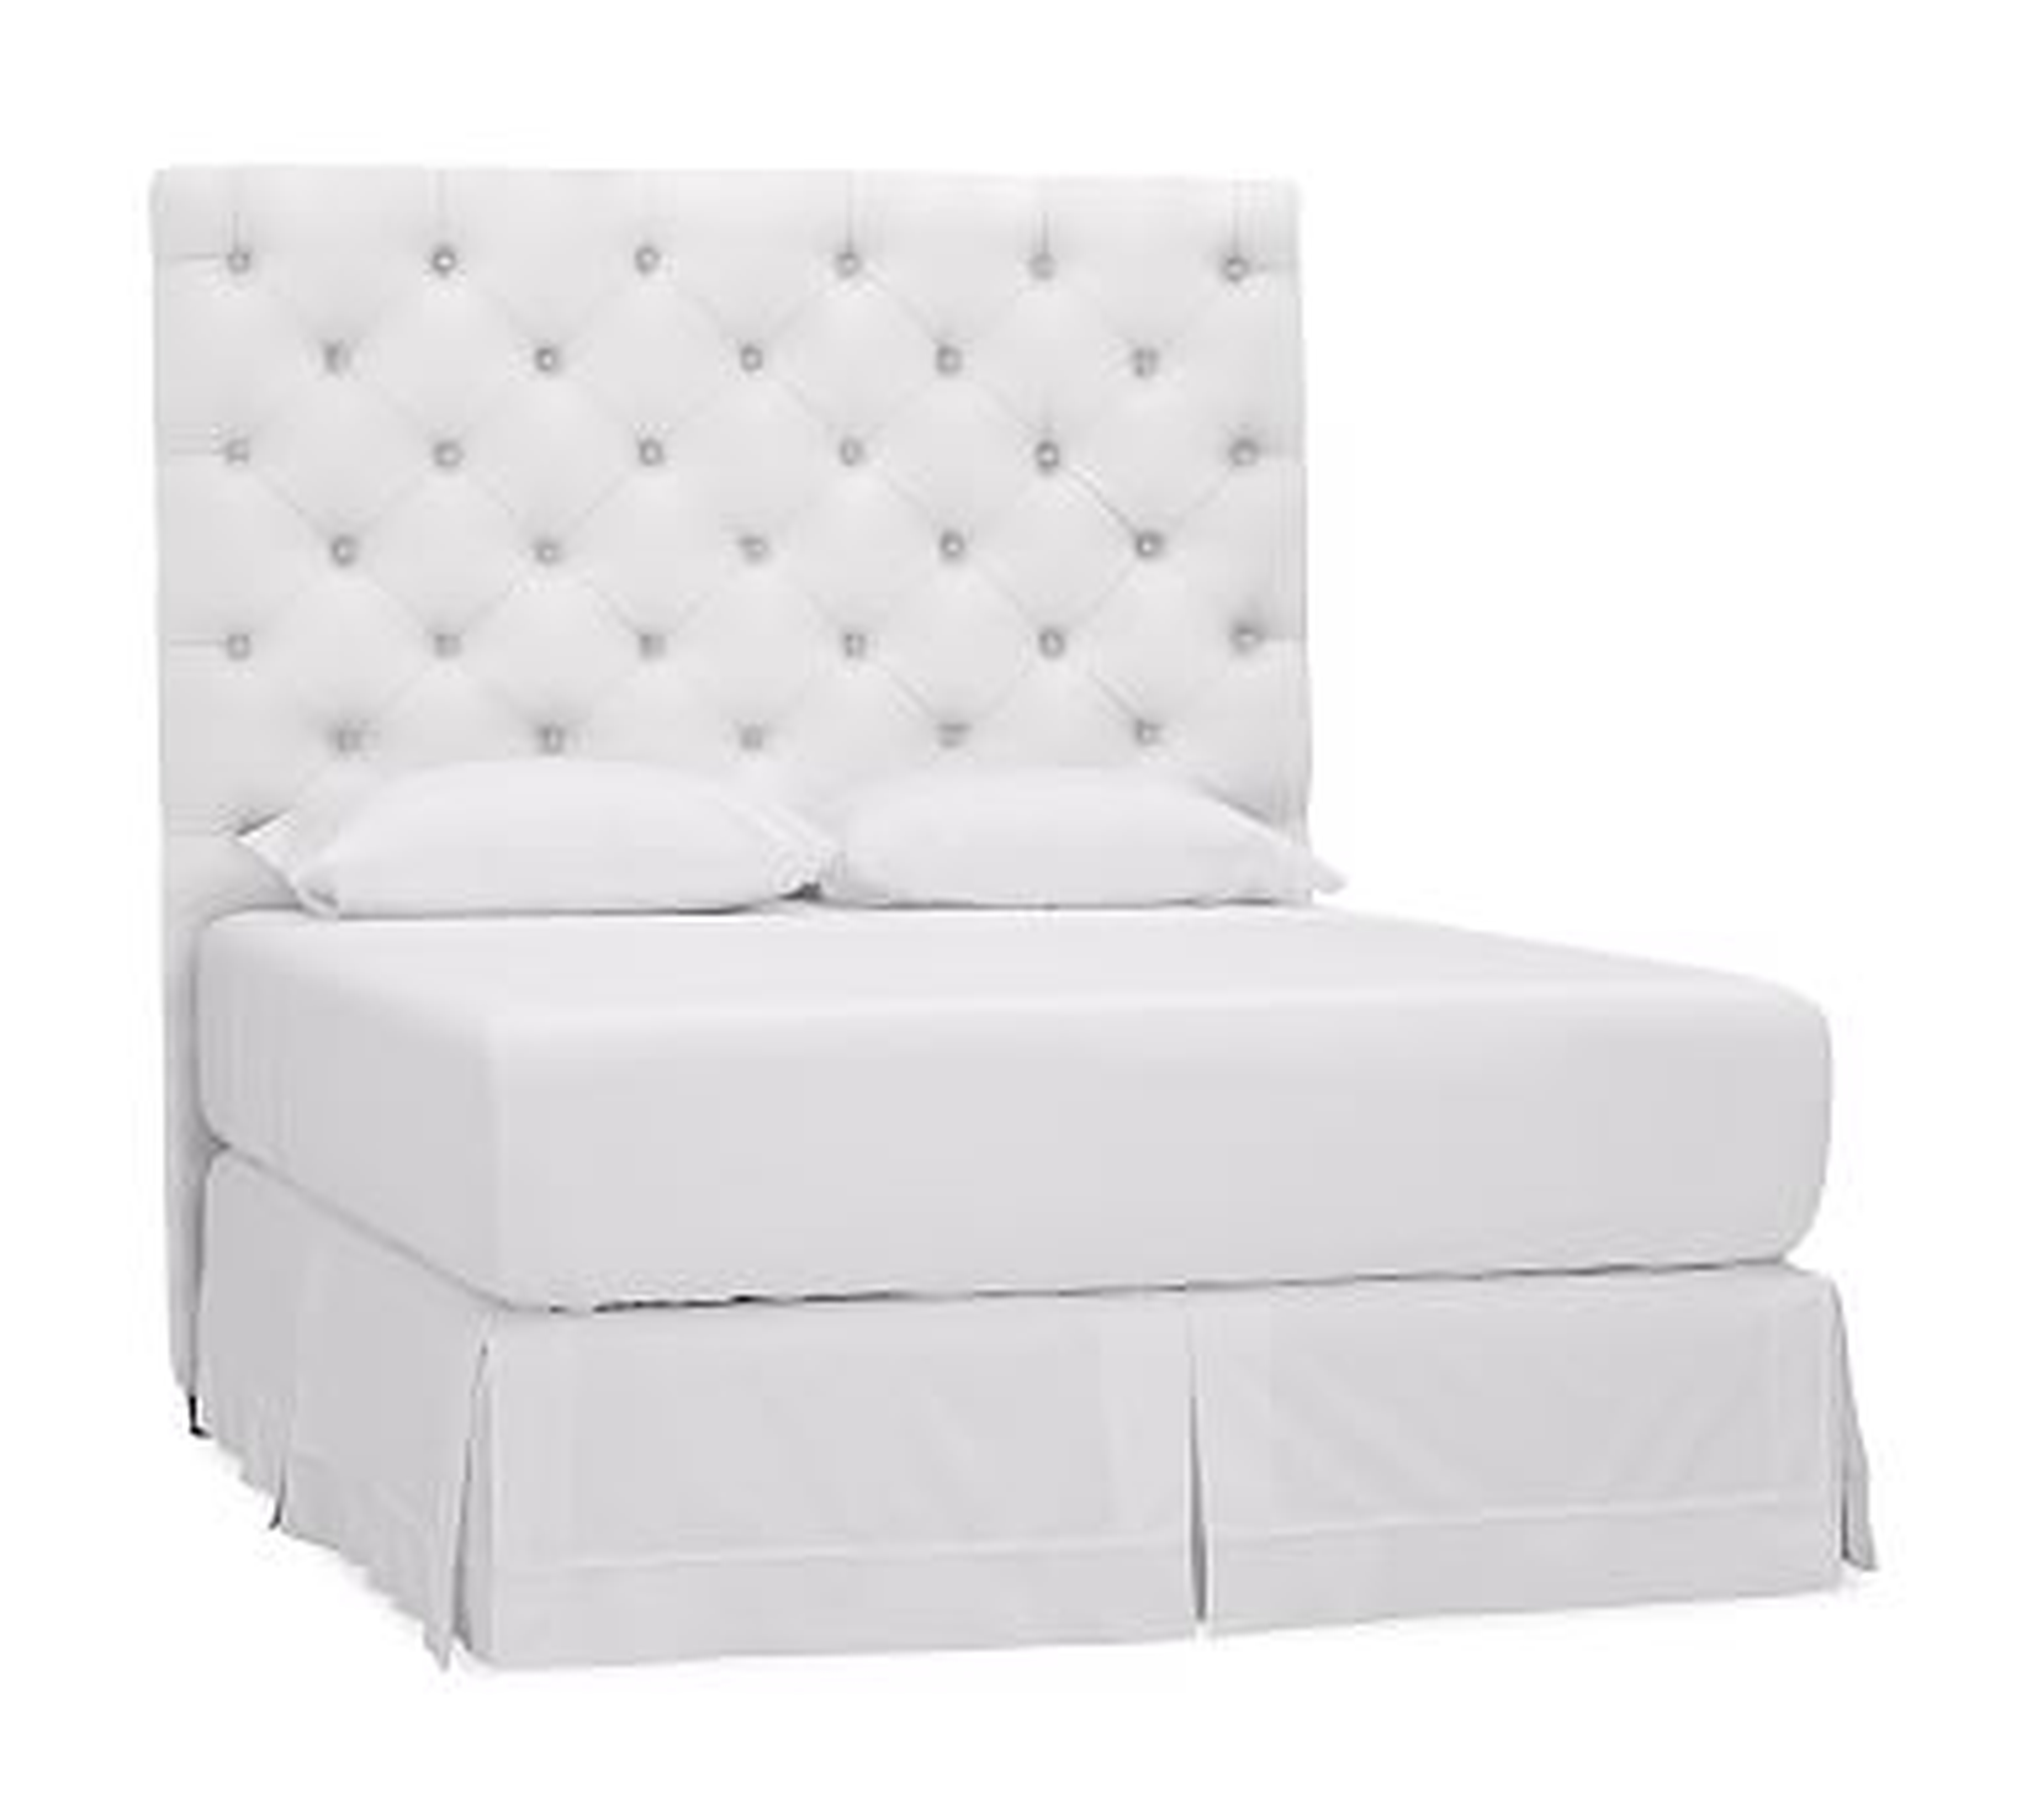 Lorraine Tufted Upholstered Tall Headboard, Queen, Twill White - Pottery Barn